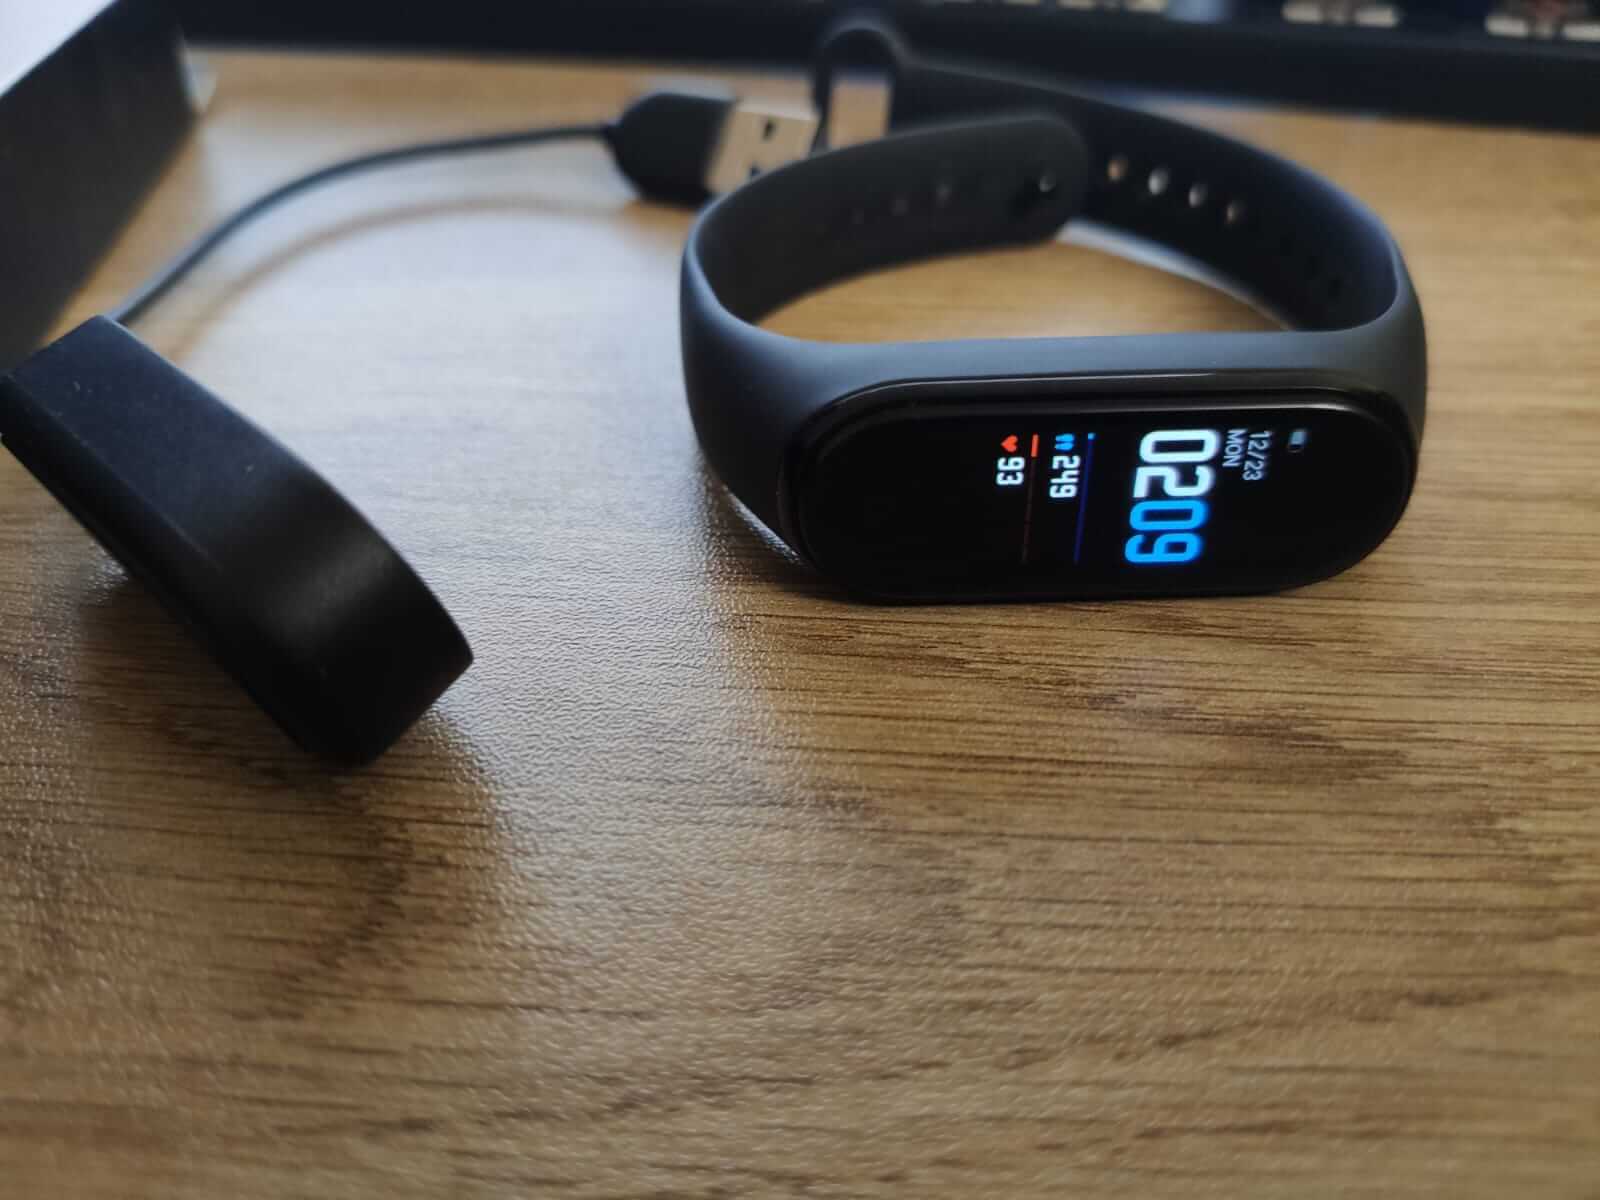 The best budget fitness tracker - the Xiaomi Mi Band 4 review